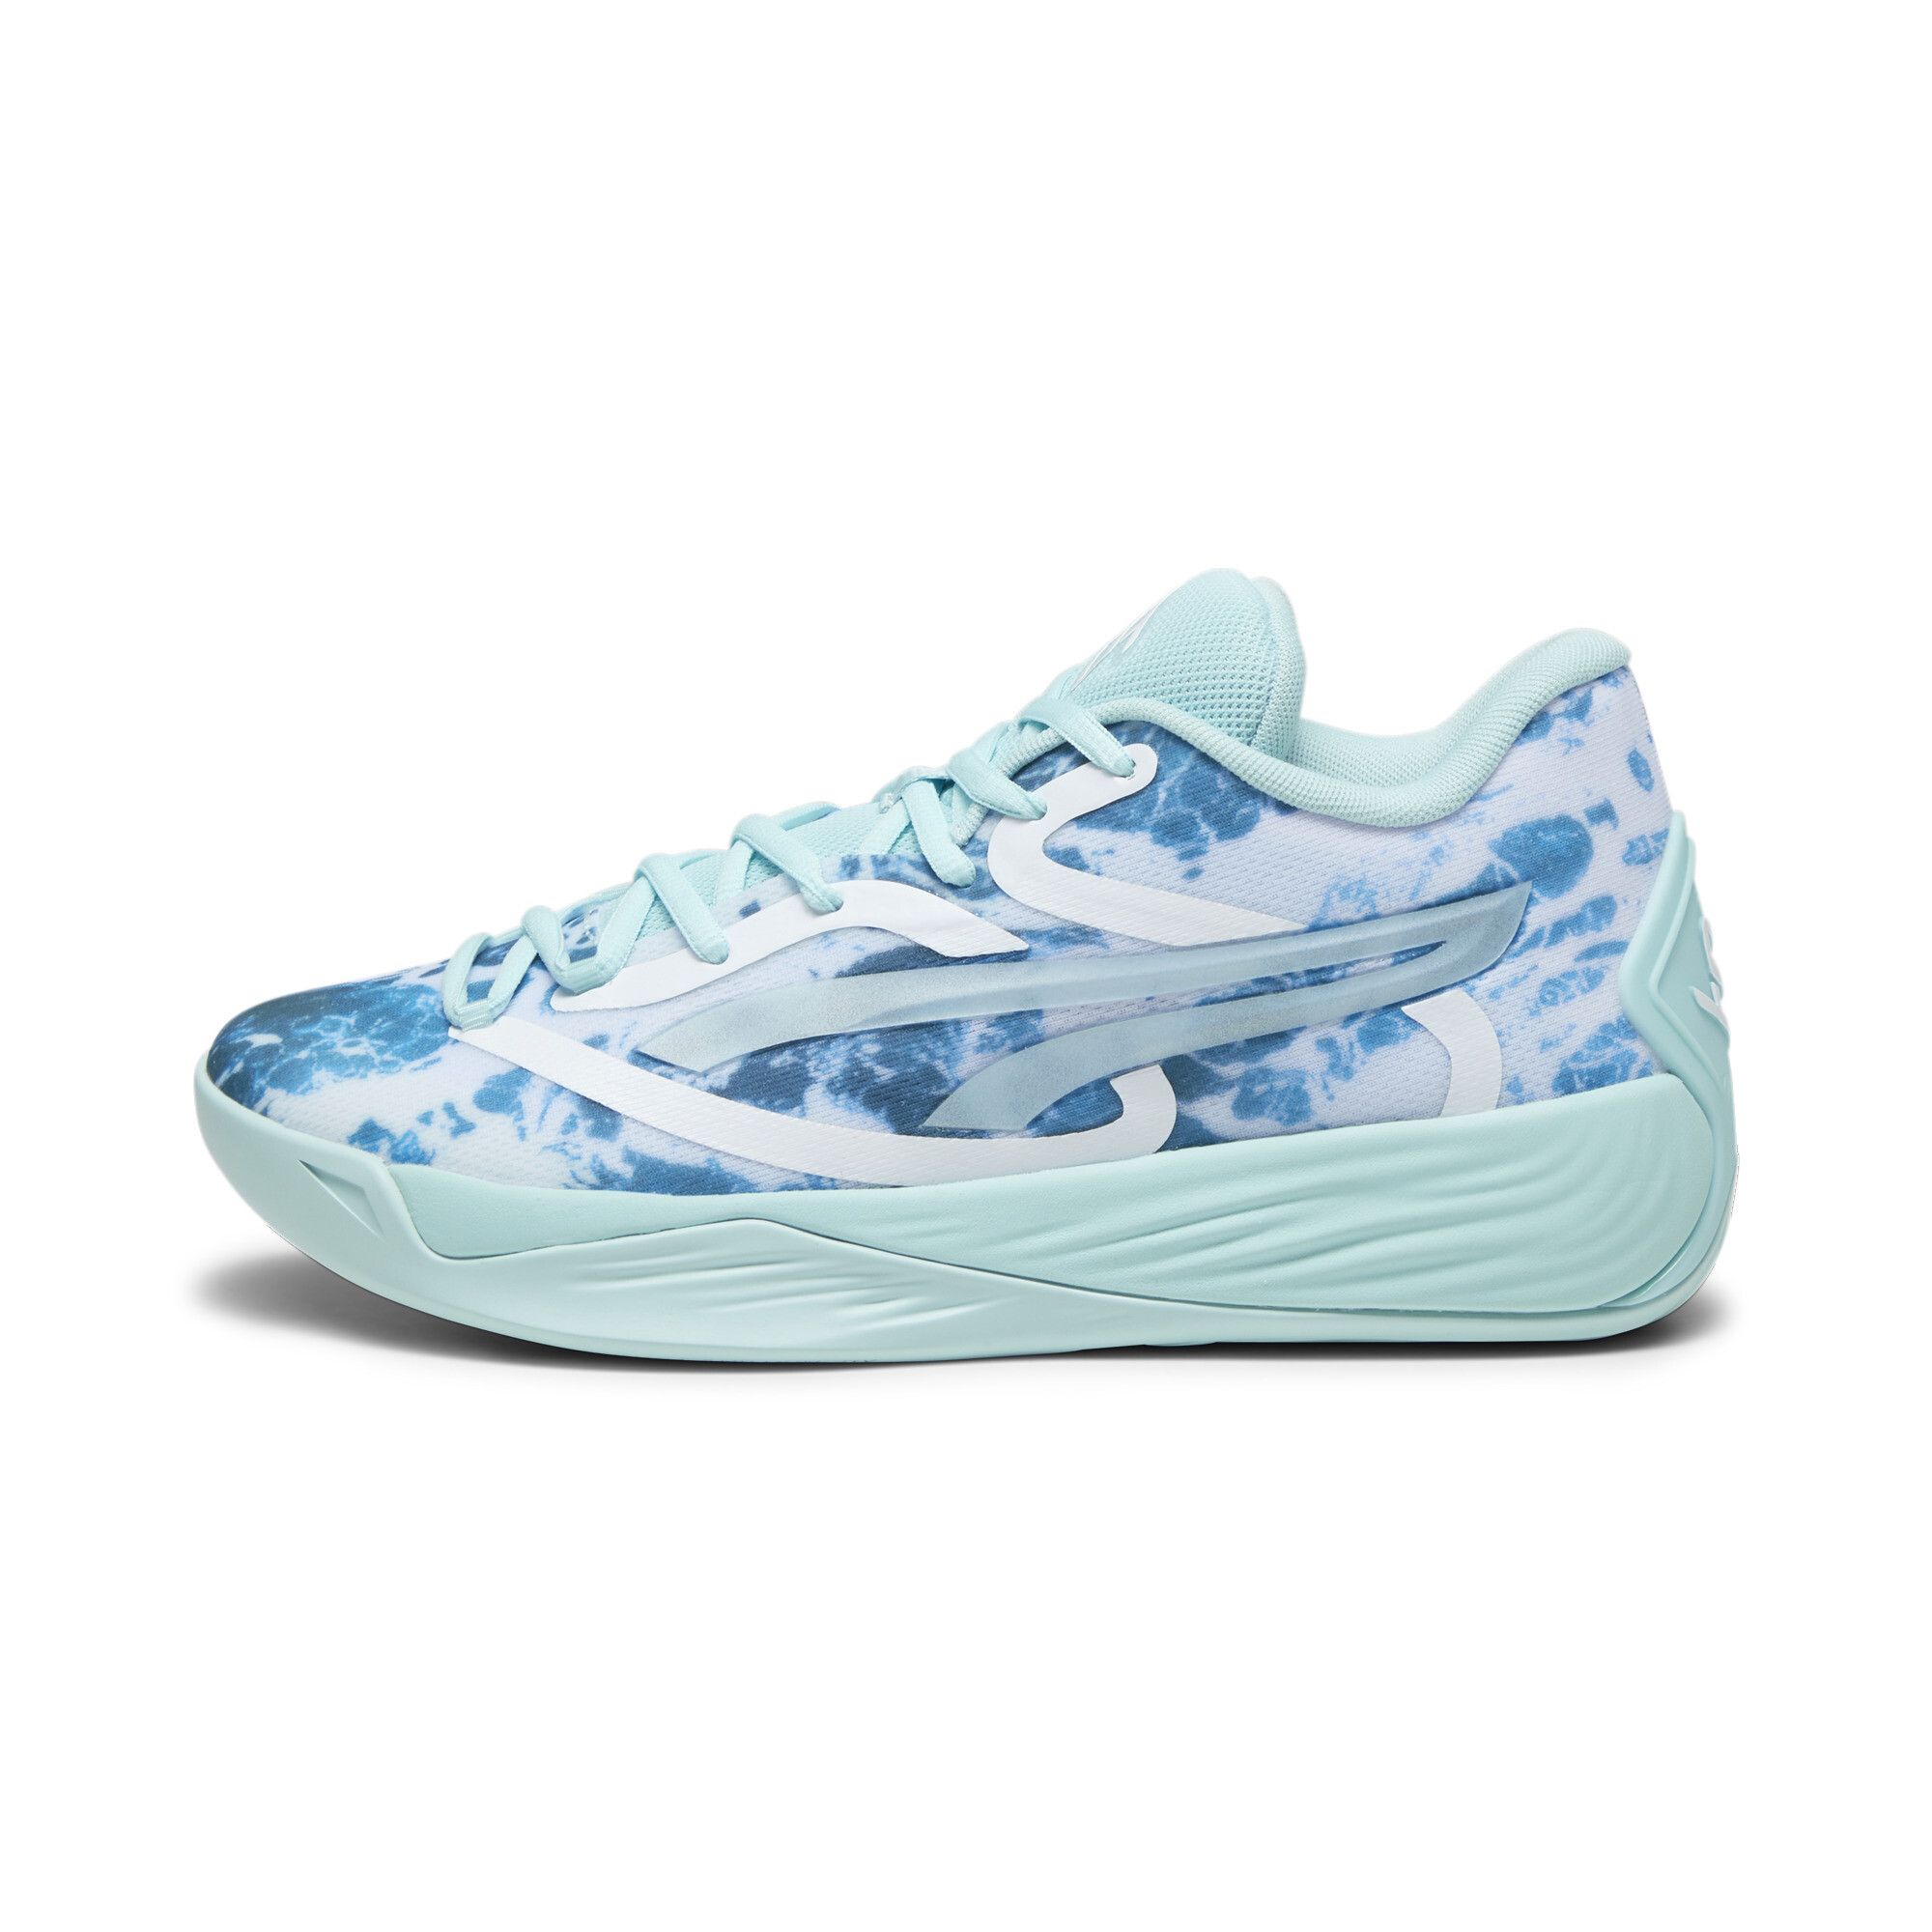 Women's Puma Stewie 2 Water's Basketball Shoes, Blue, Size 43, Shoes